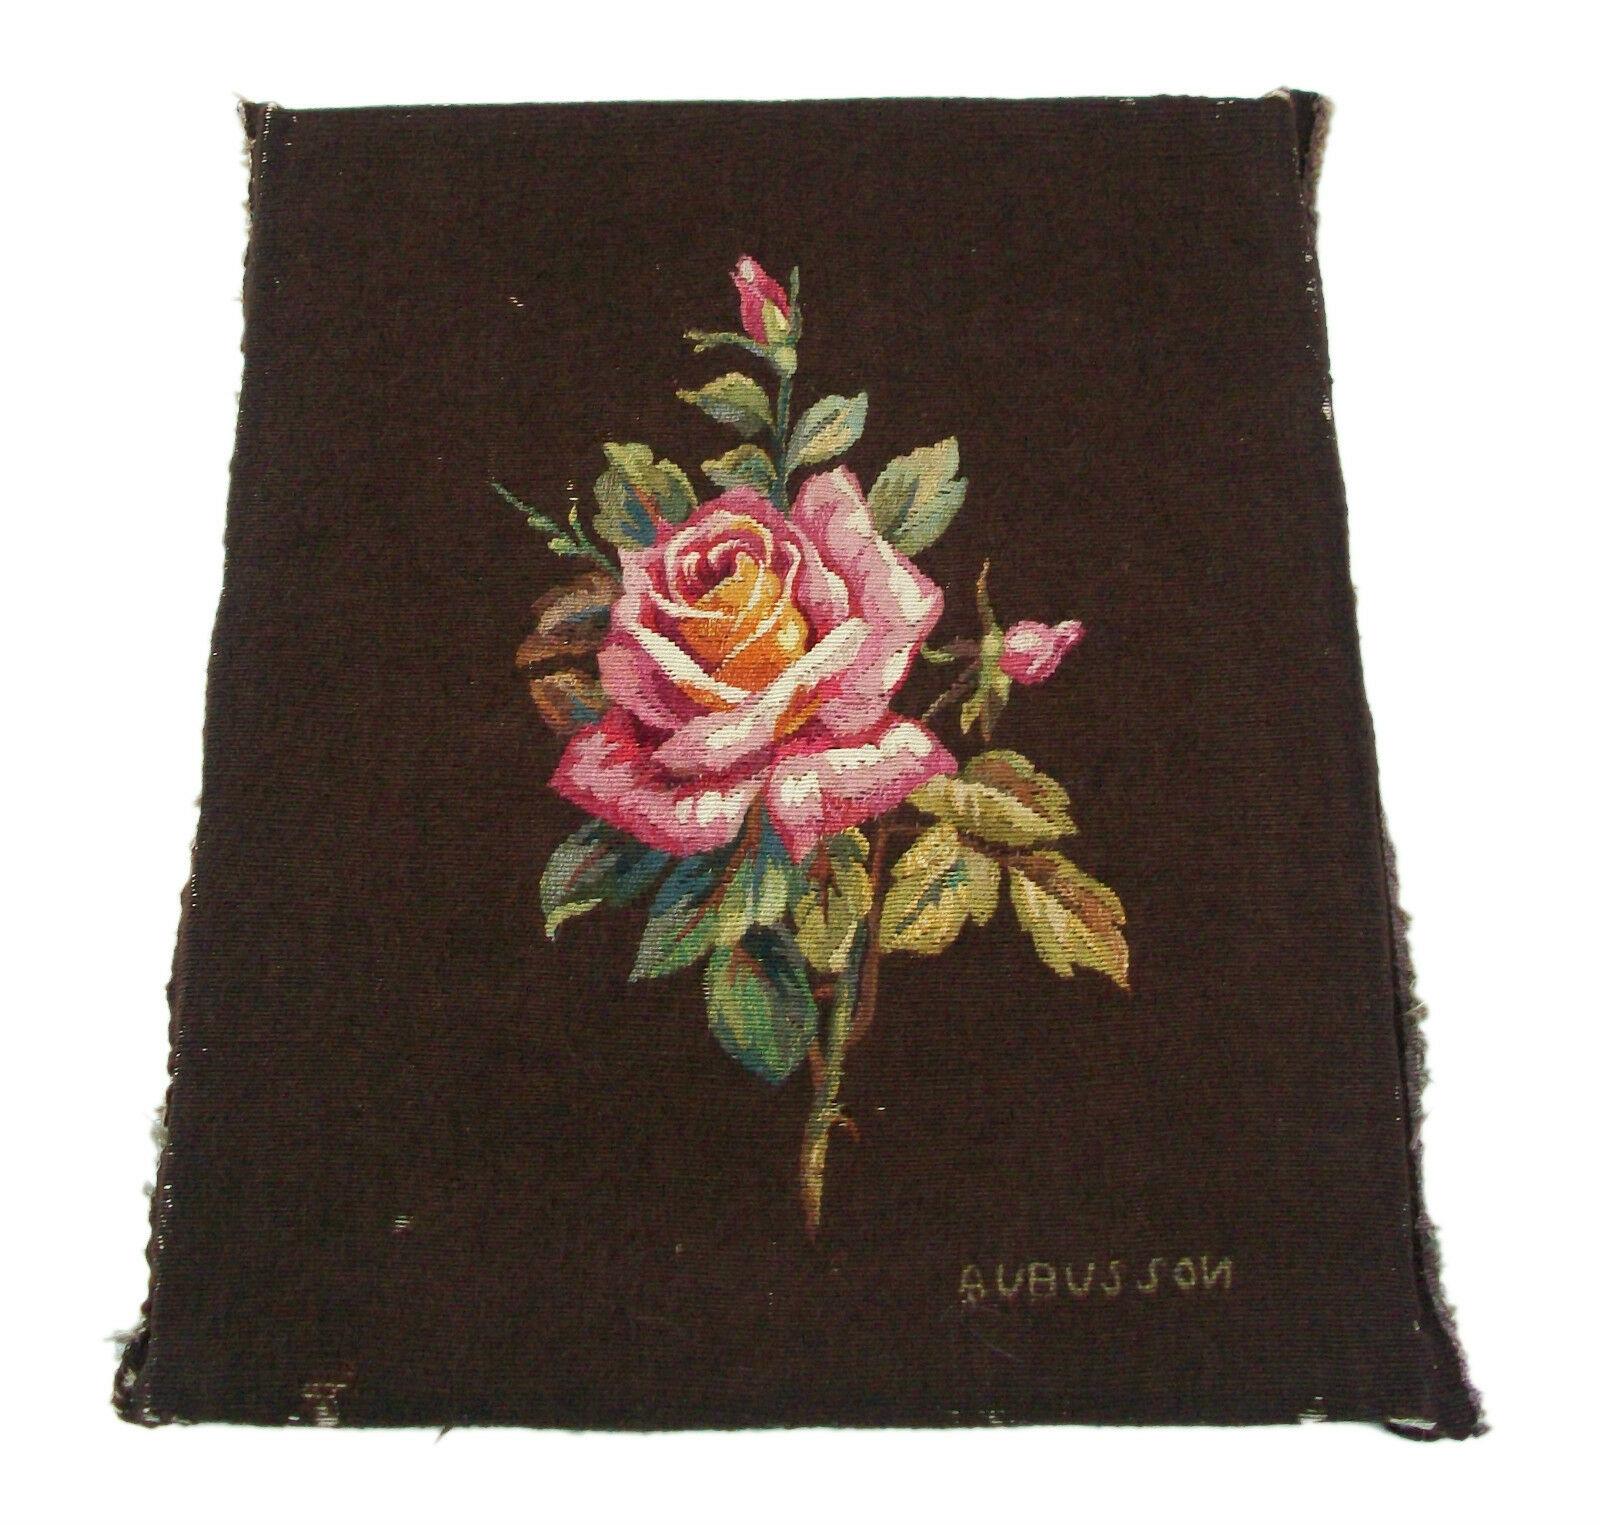 Aubusson - Vintage Silk & Wool Floral Tapestry - Signed - France - 20th Century In Good Condition For Sale In Chatham, ON